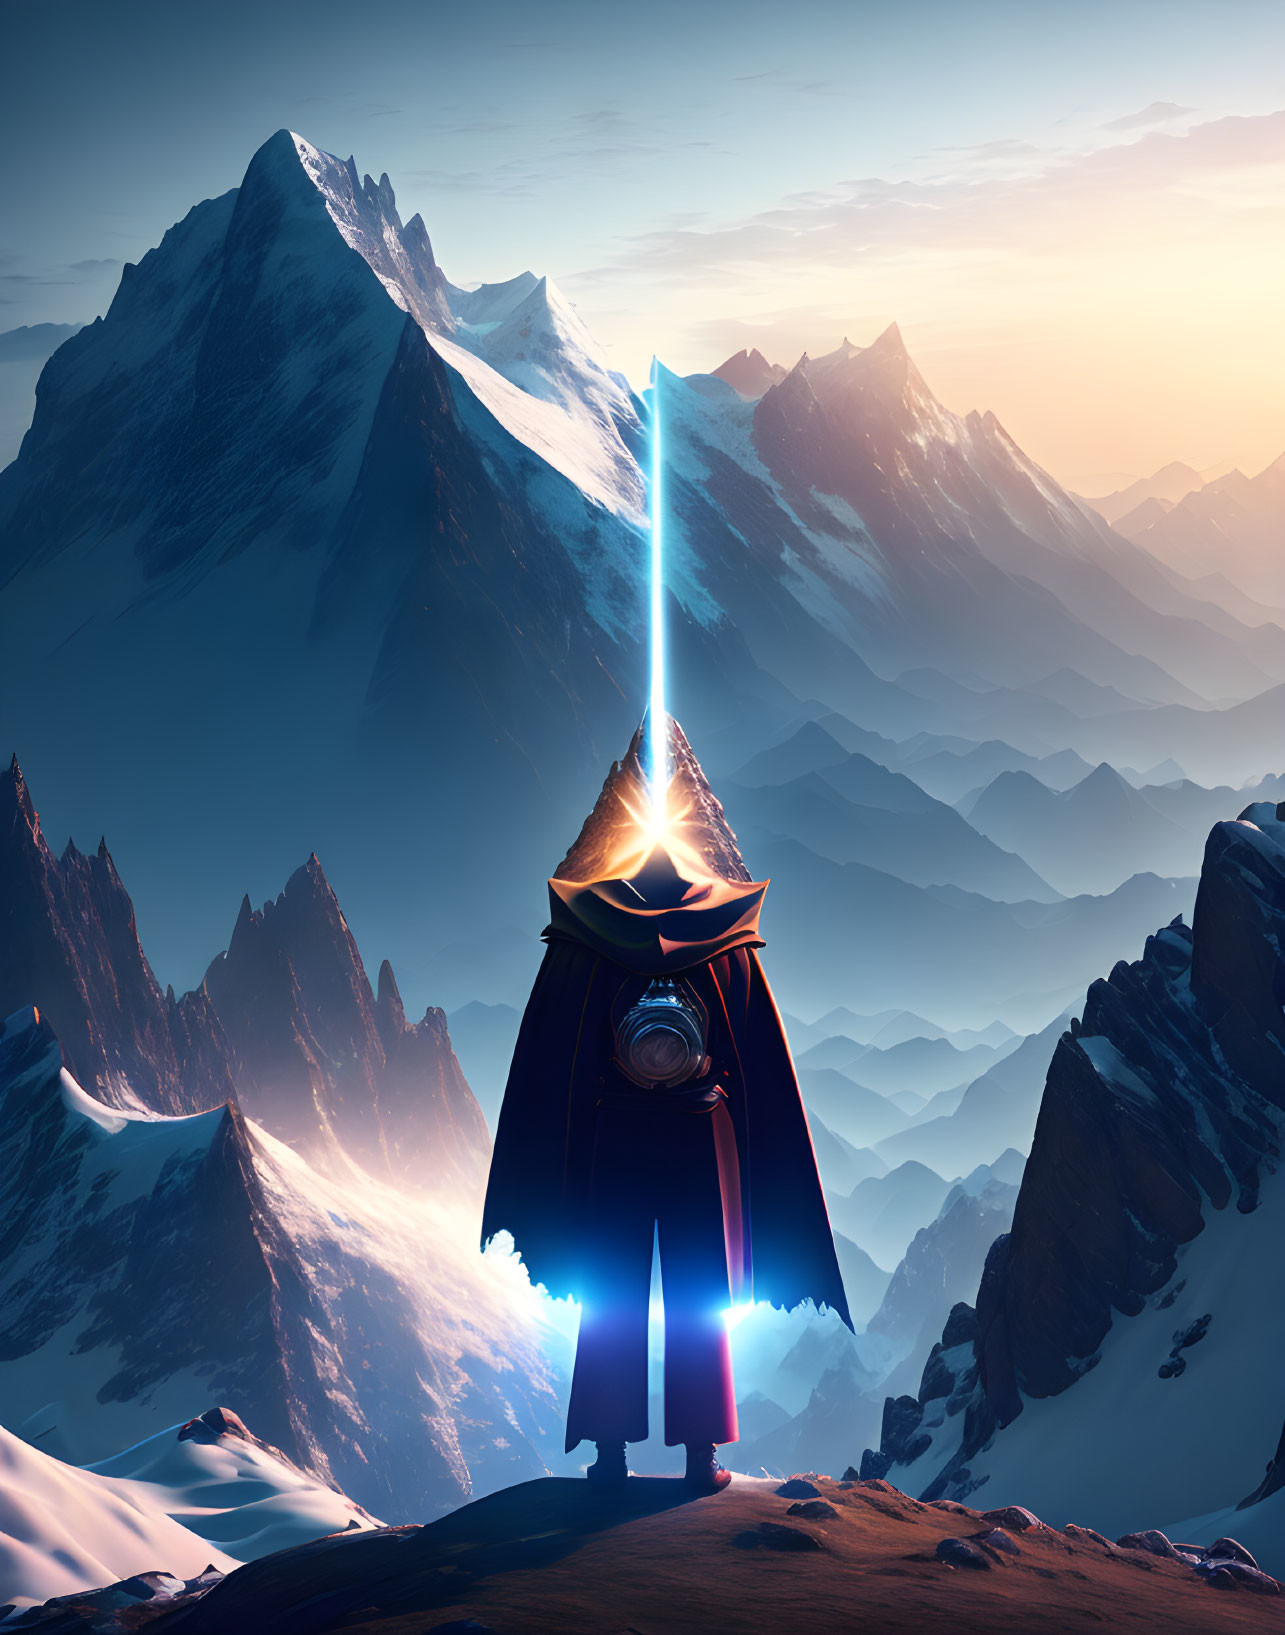 Cloaked figure on snowy mountain peak gazes at blue beam and sunrise